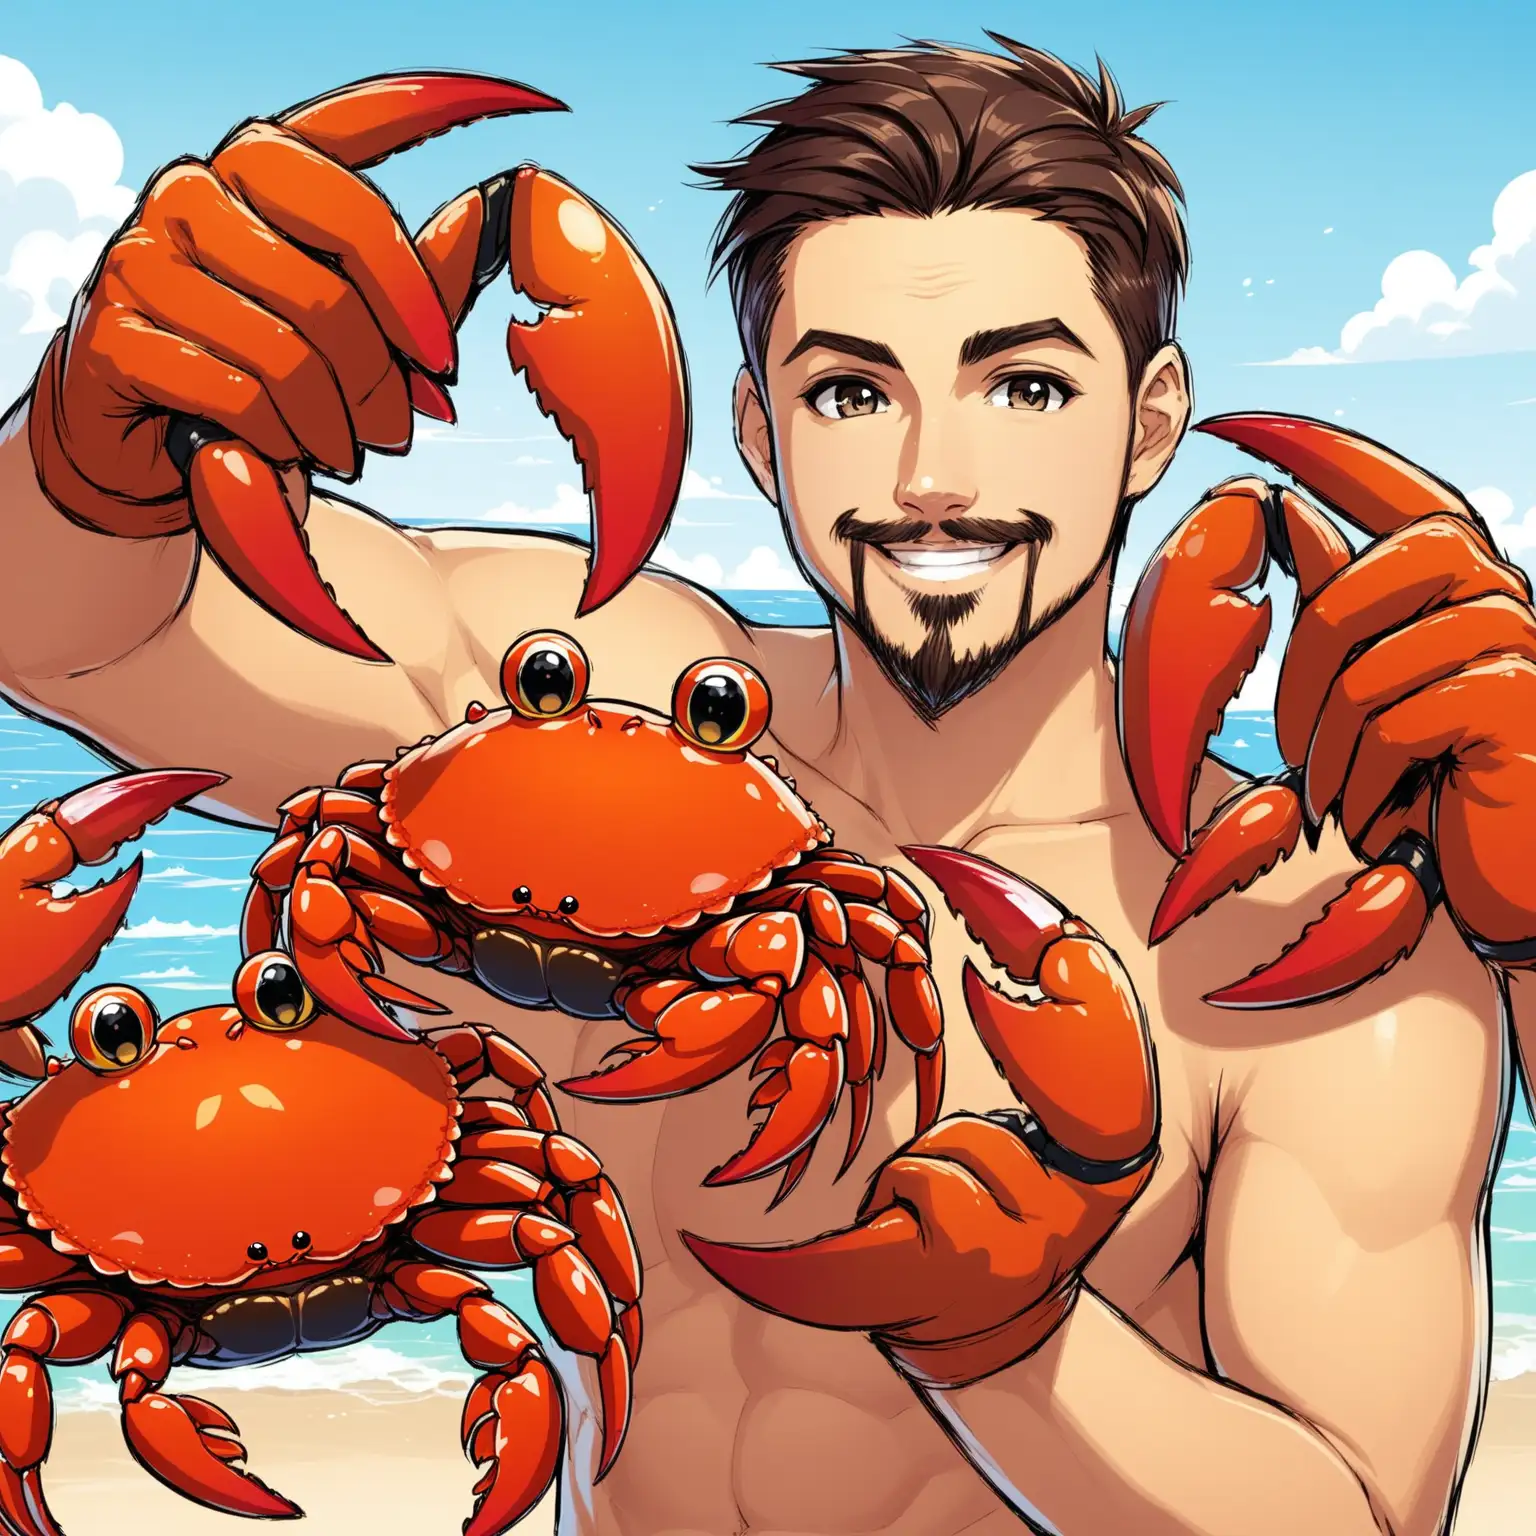 Canadian Man with Goatee Sharing Crab Feast with Friends